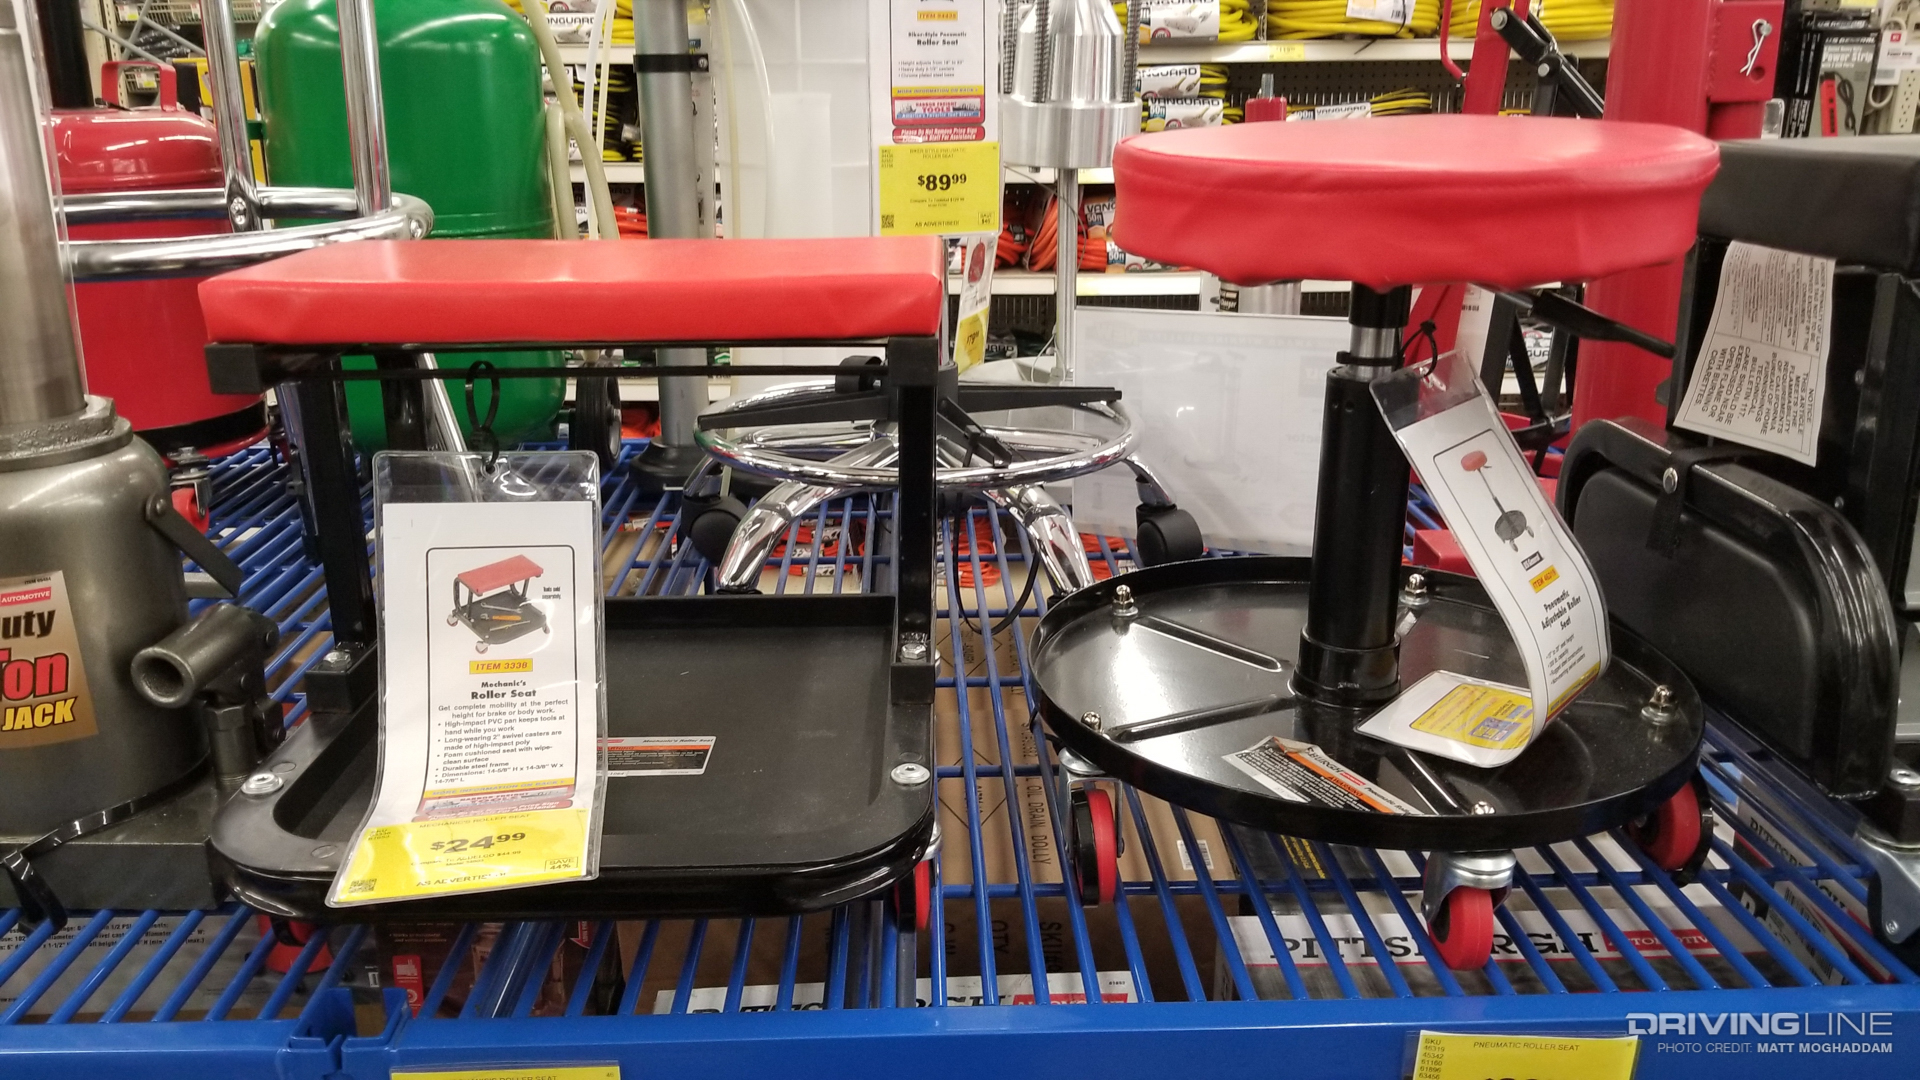 11 More Do's and Don'ts of Harbor Freight Tools | DrivingLine